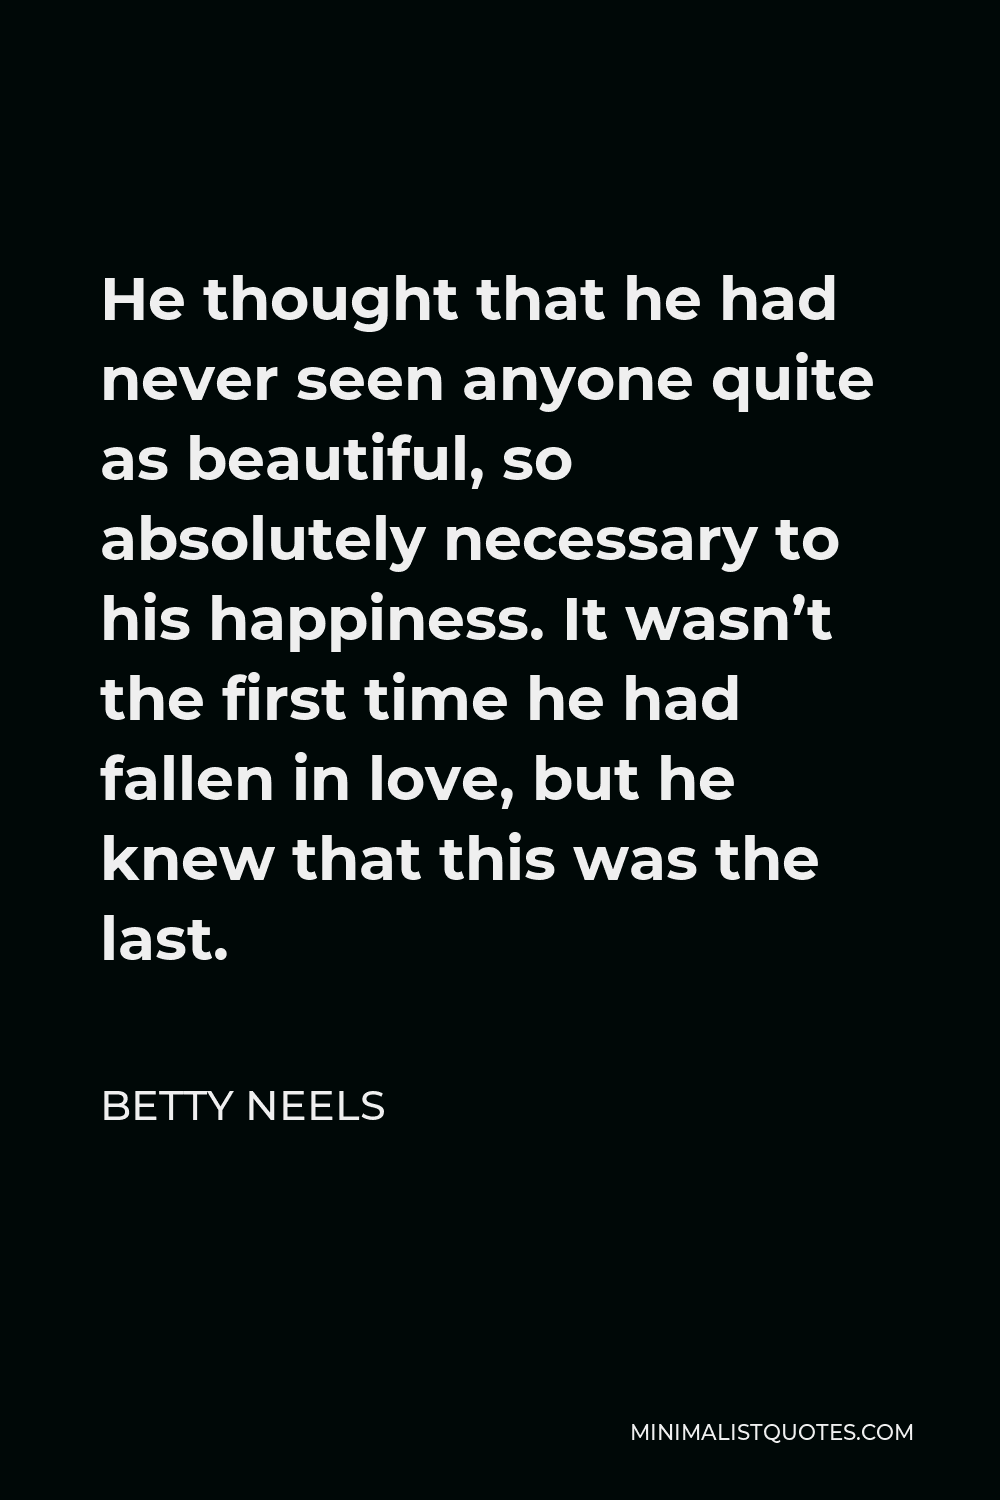 Betty Neels Quote - He thought that he had never seen anyone quite as beautiful, so absolutely necessary to his happiness. It wasn’t the first time he had fallen in love, but he knew that this was the last.